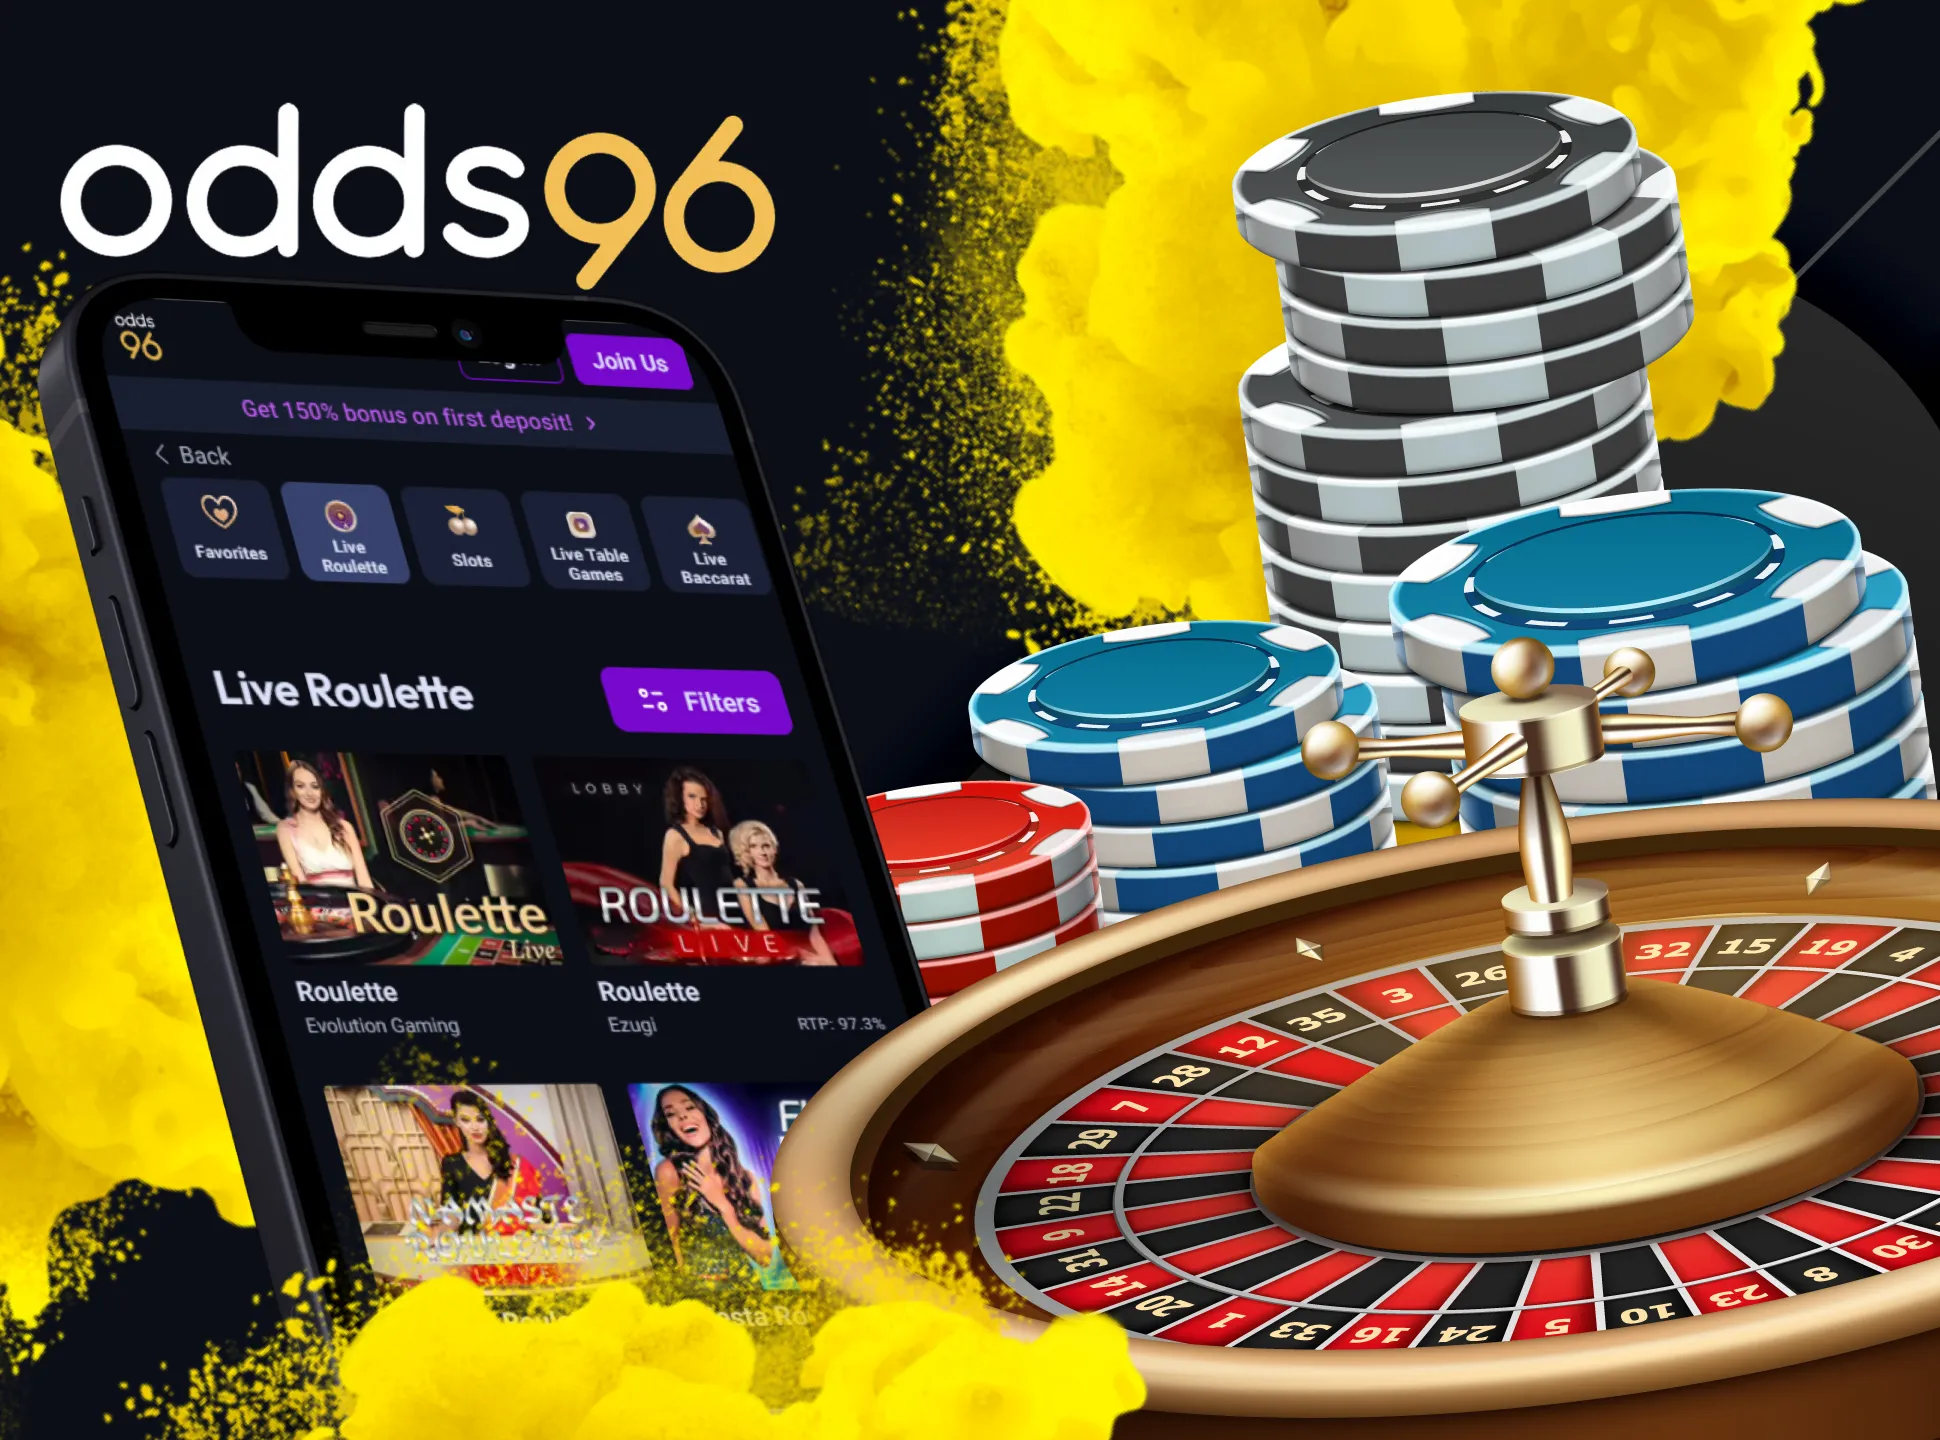 Spin roulette using Odds96 app.